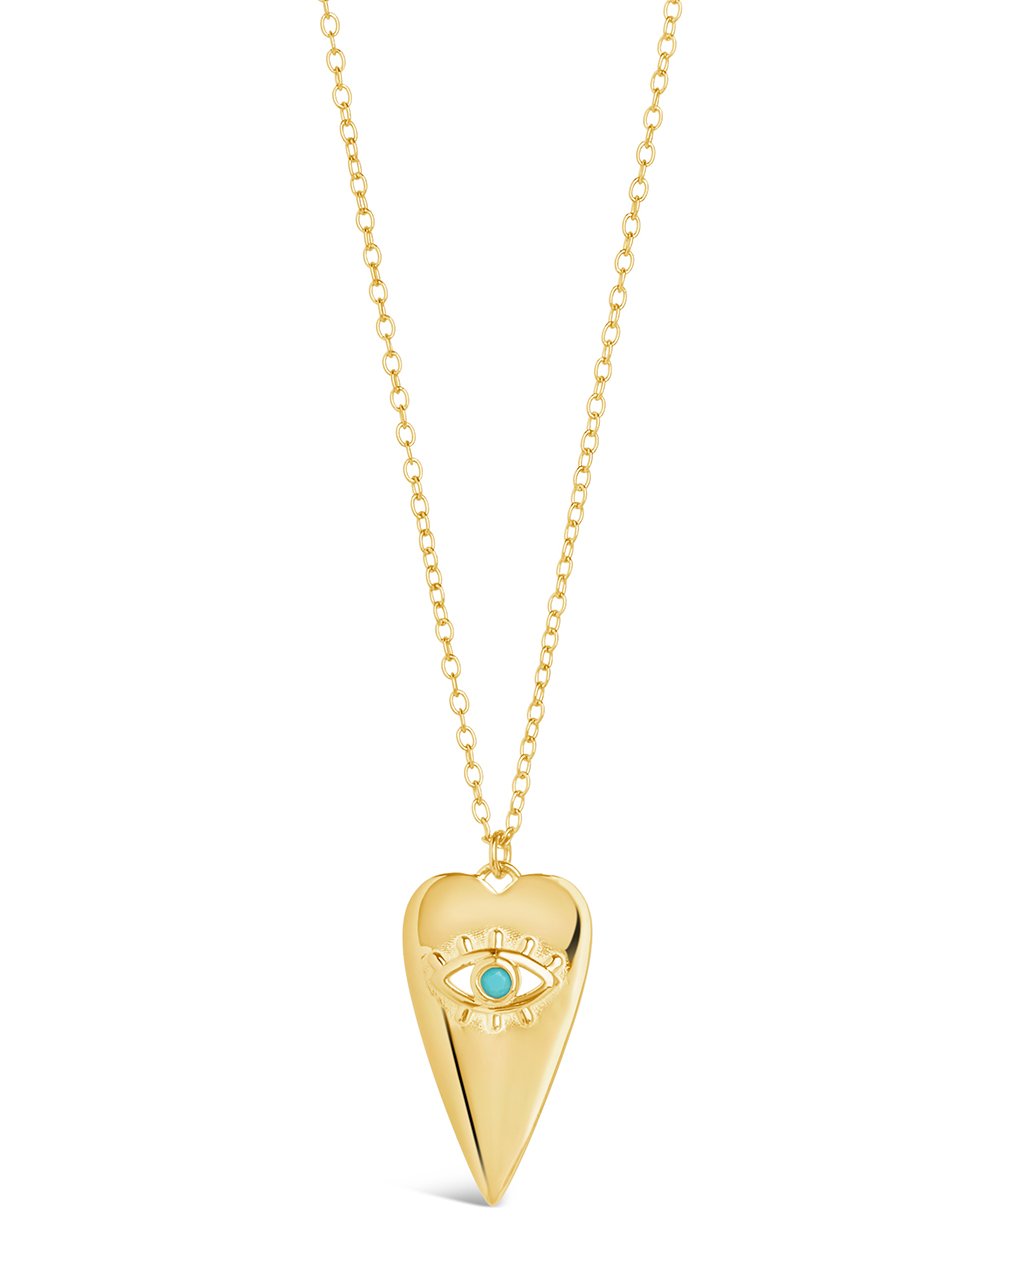 Heart Pendant with Turquoise Evil Eye Pendant Necklace Sterling Forever Gold 